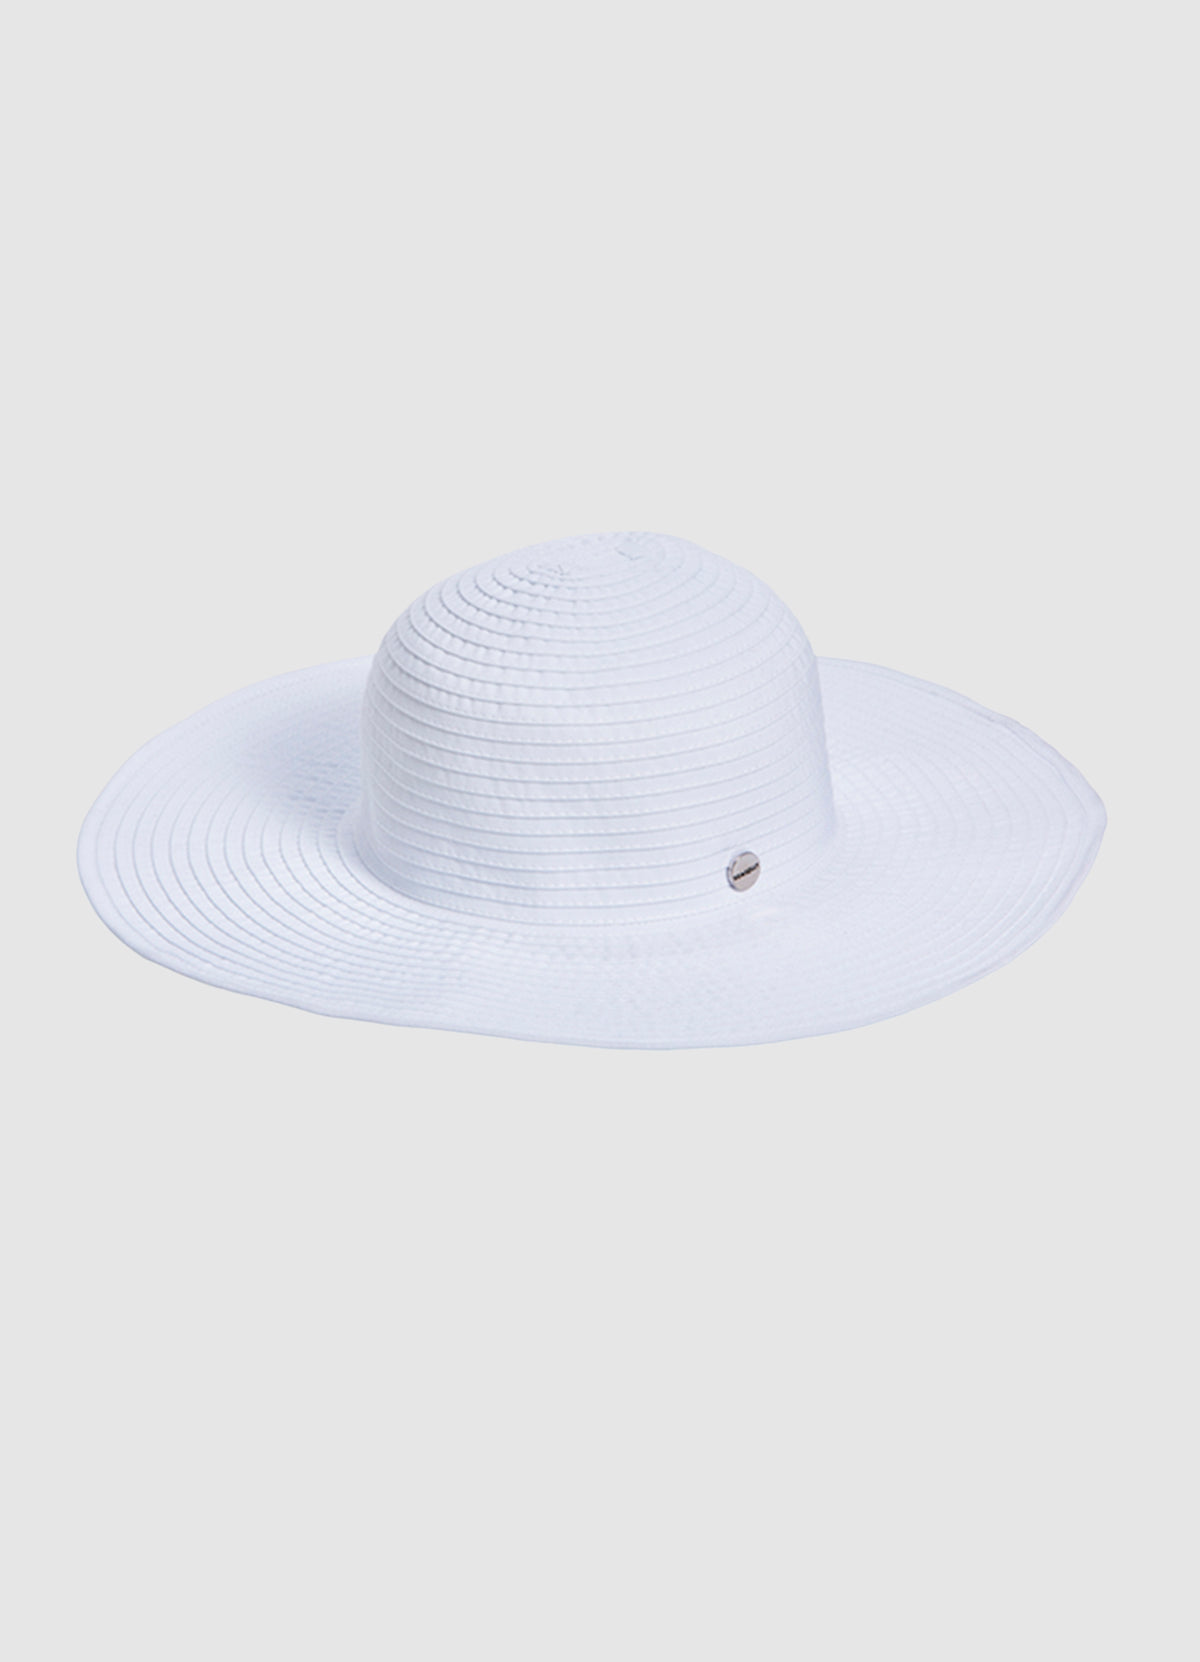 Seafolly Lizzy Hat